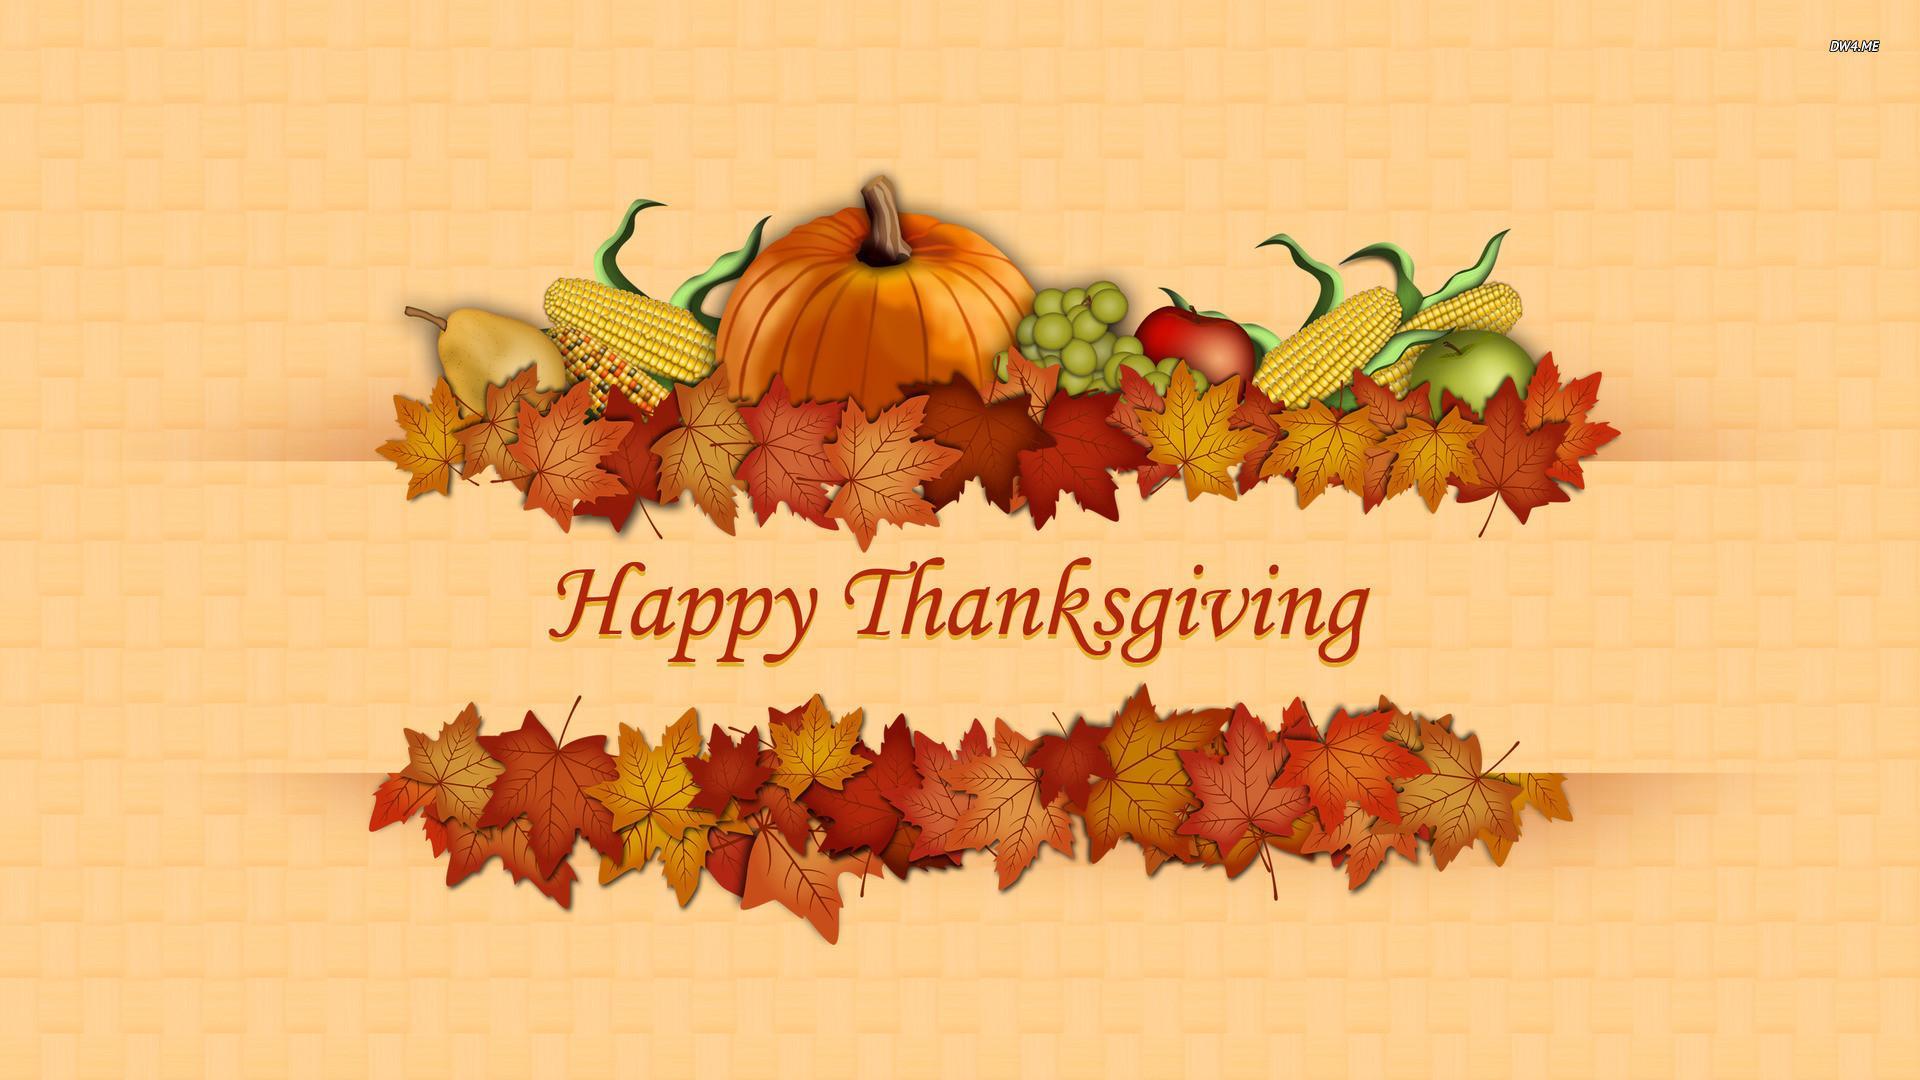 Download Free Thanksgiving Wallpaper, HD Background